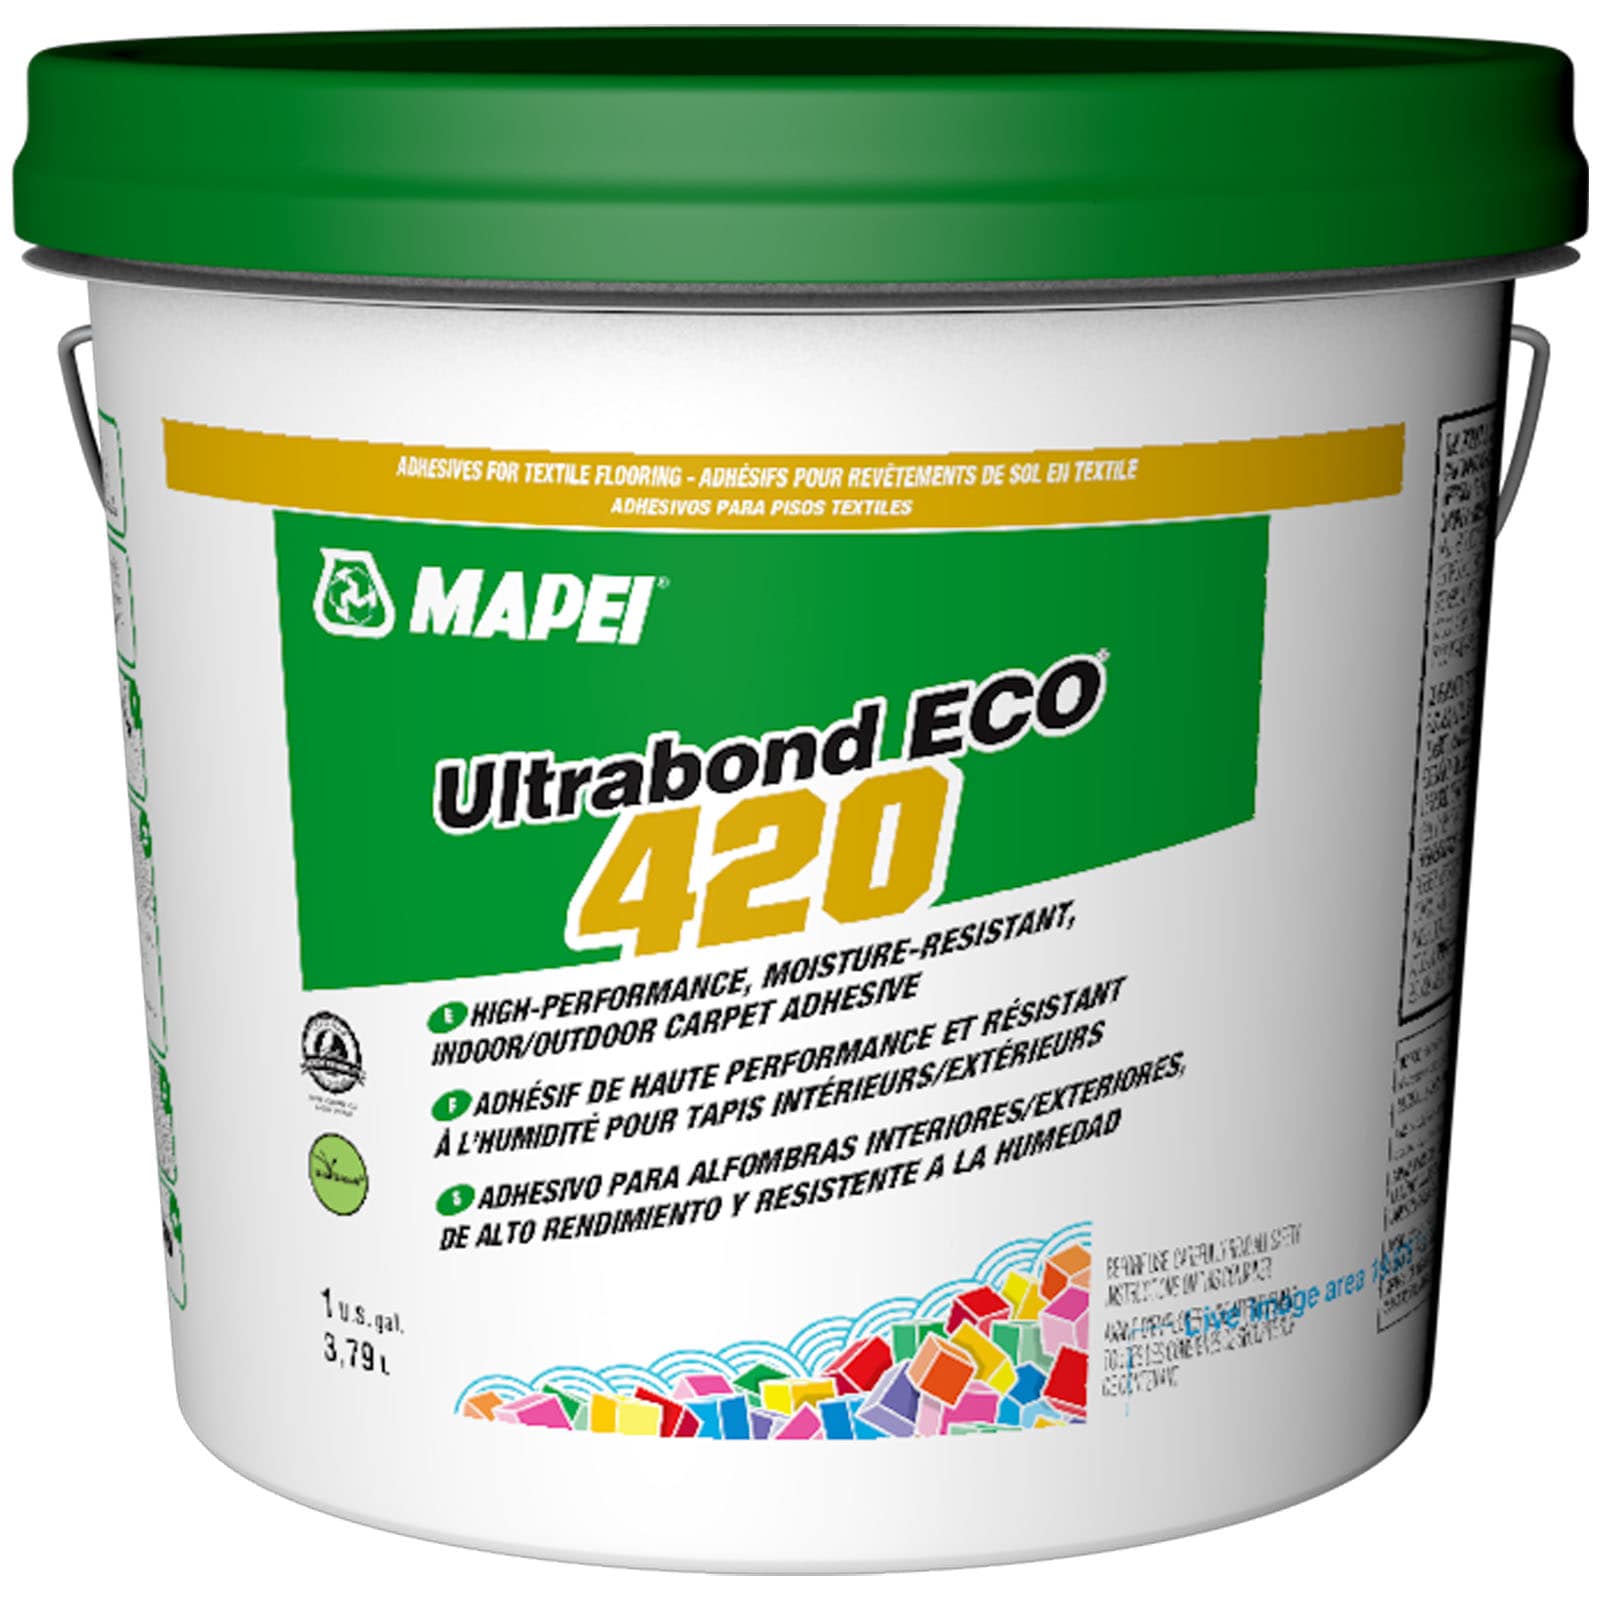 What Is The Best Tile Adhesive For Outdoor Use